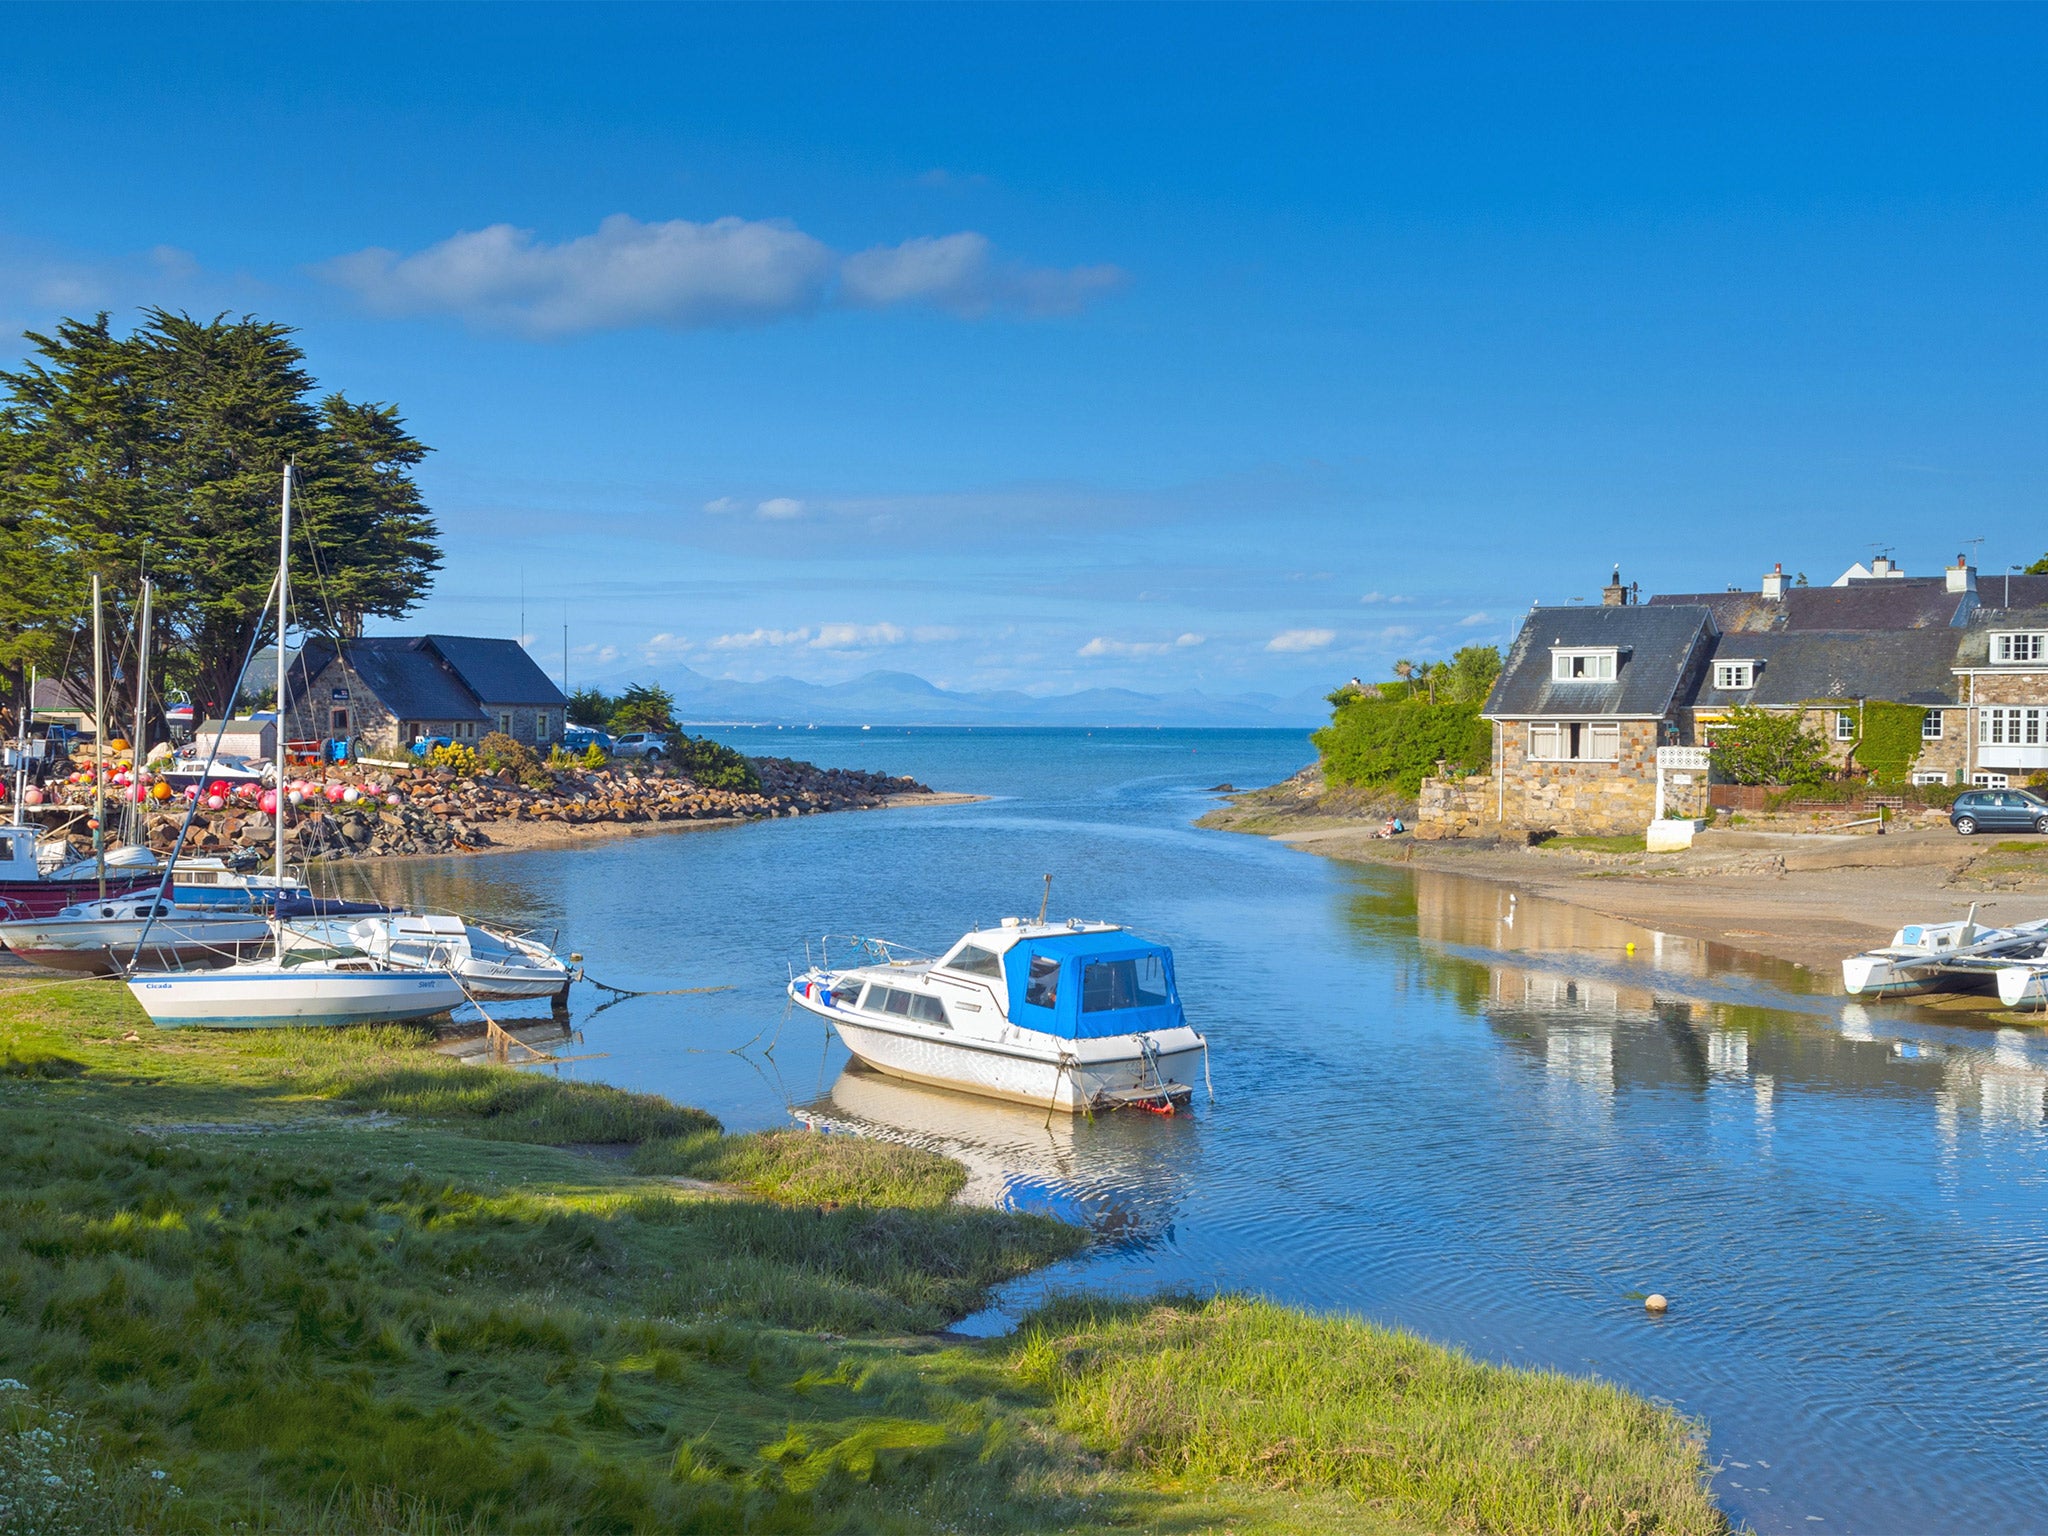 The seaside resort of Abersoch on the North Wales Llyn Peninsula, one of the areas targeted by the Crown Estates